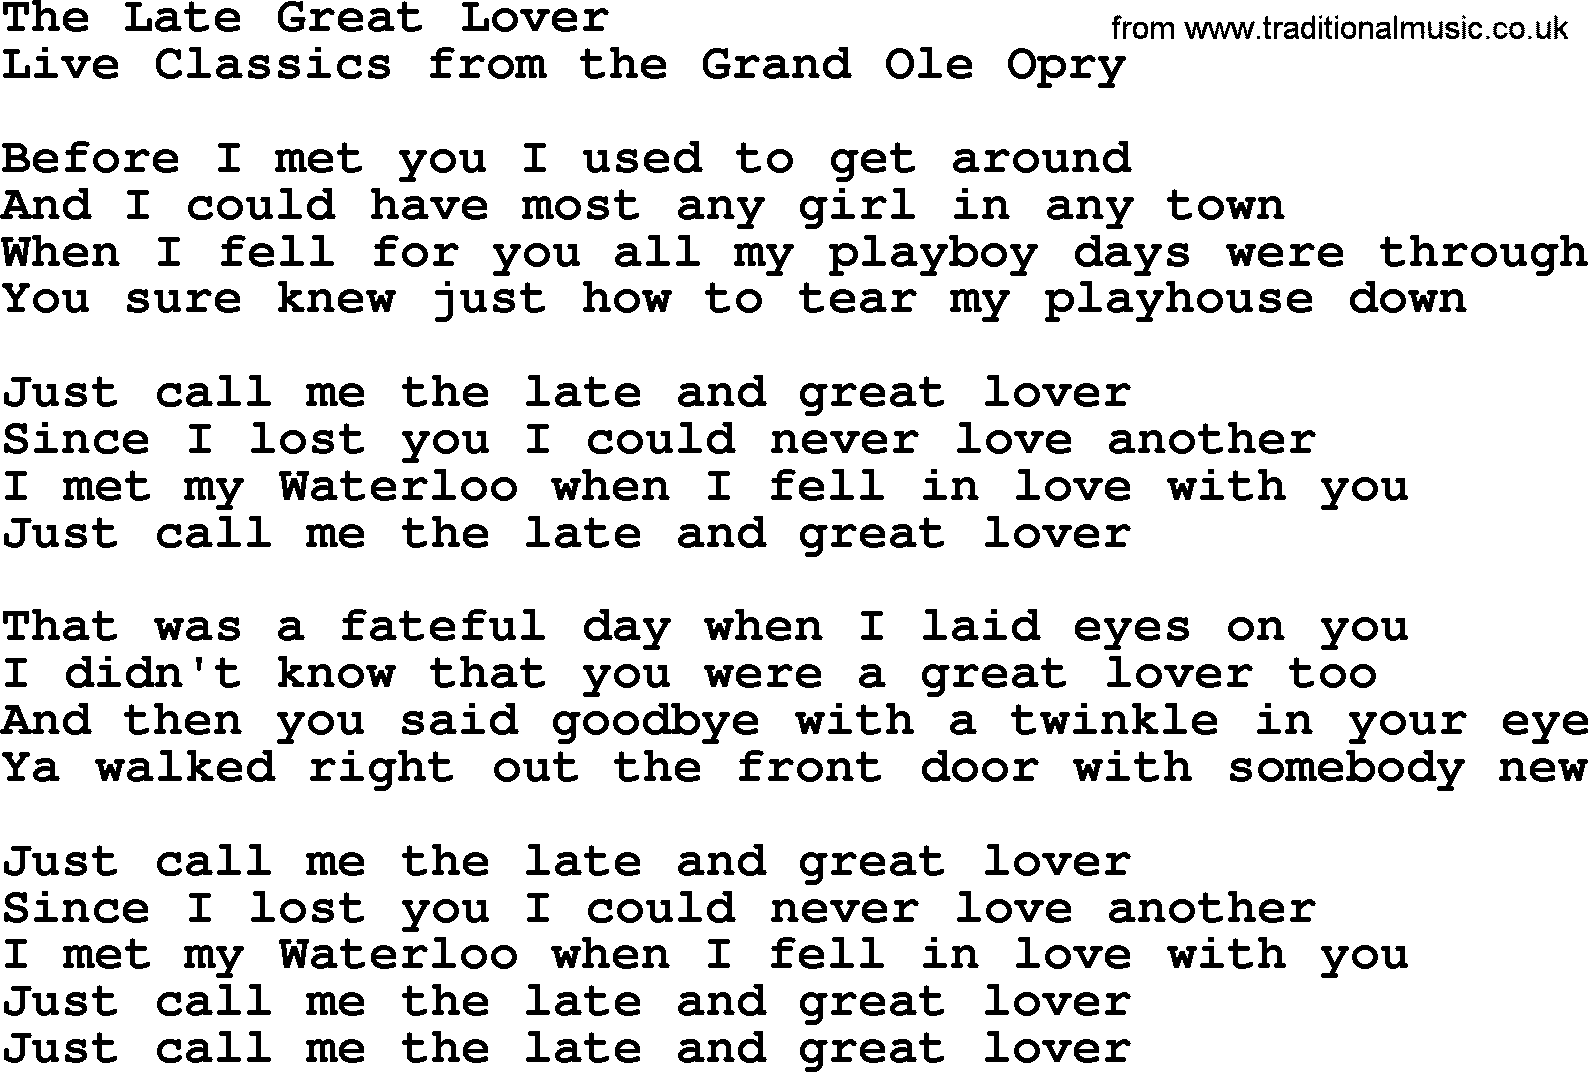 Marty Robbins song: The Late Great Lover, lyrics